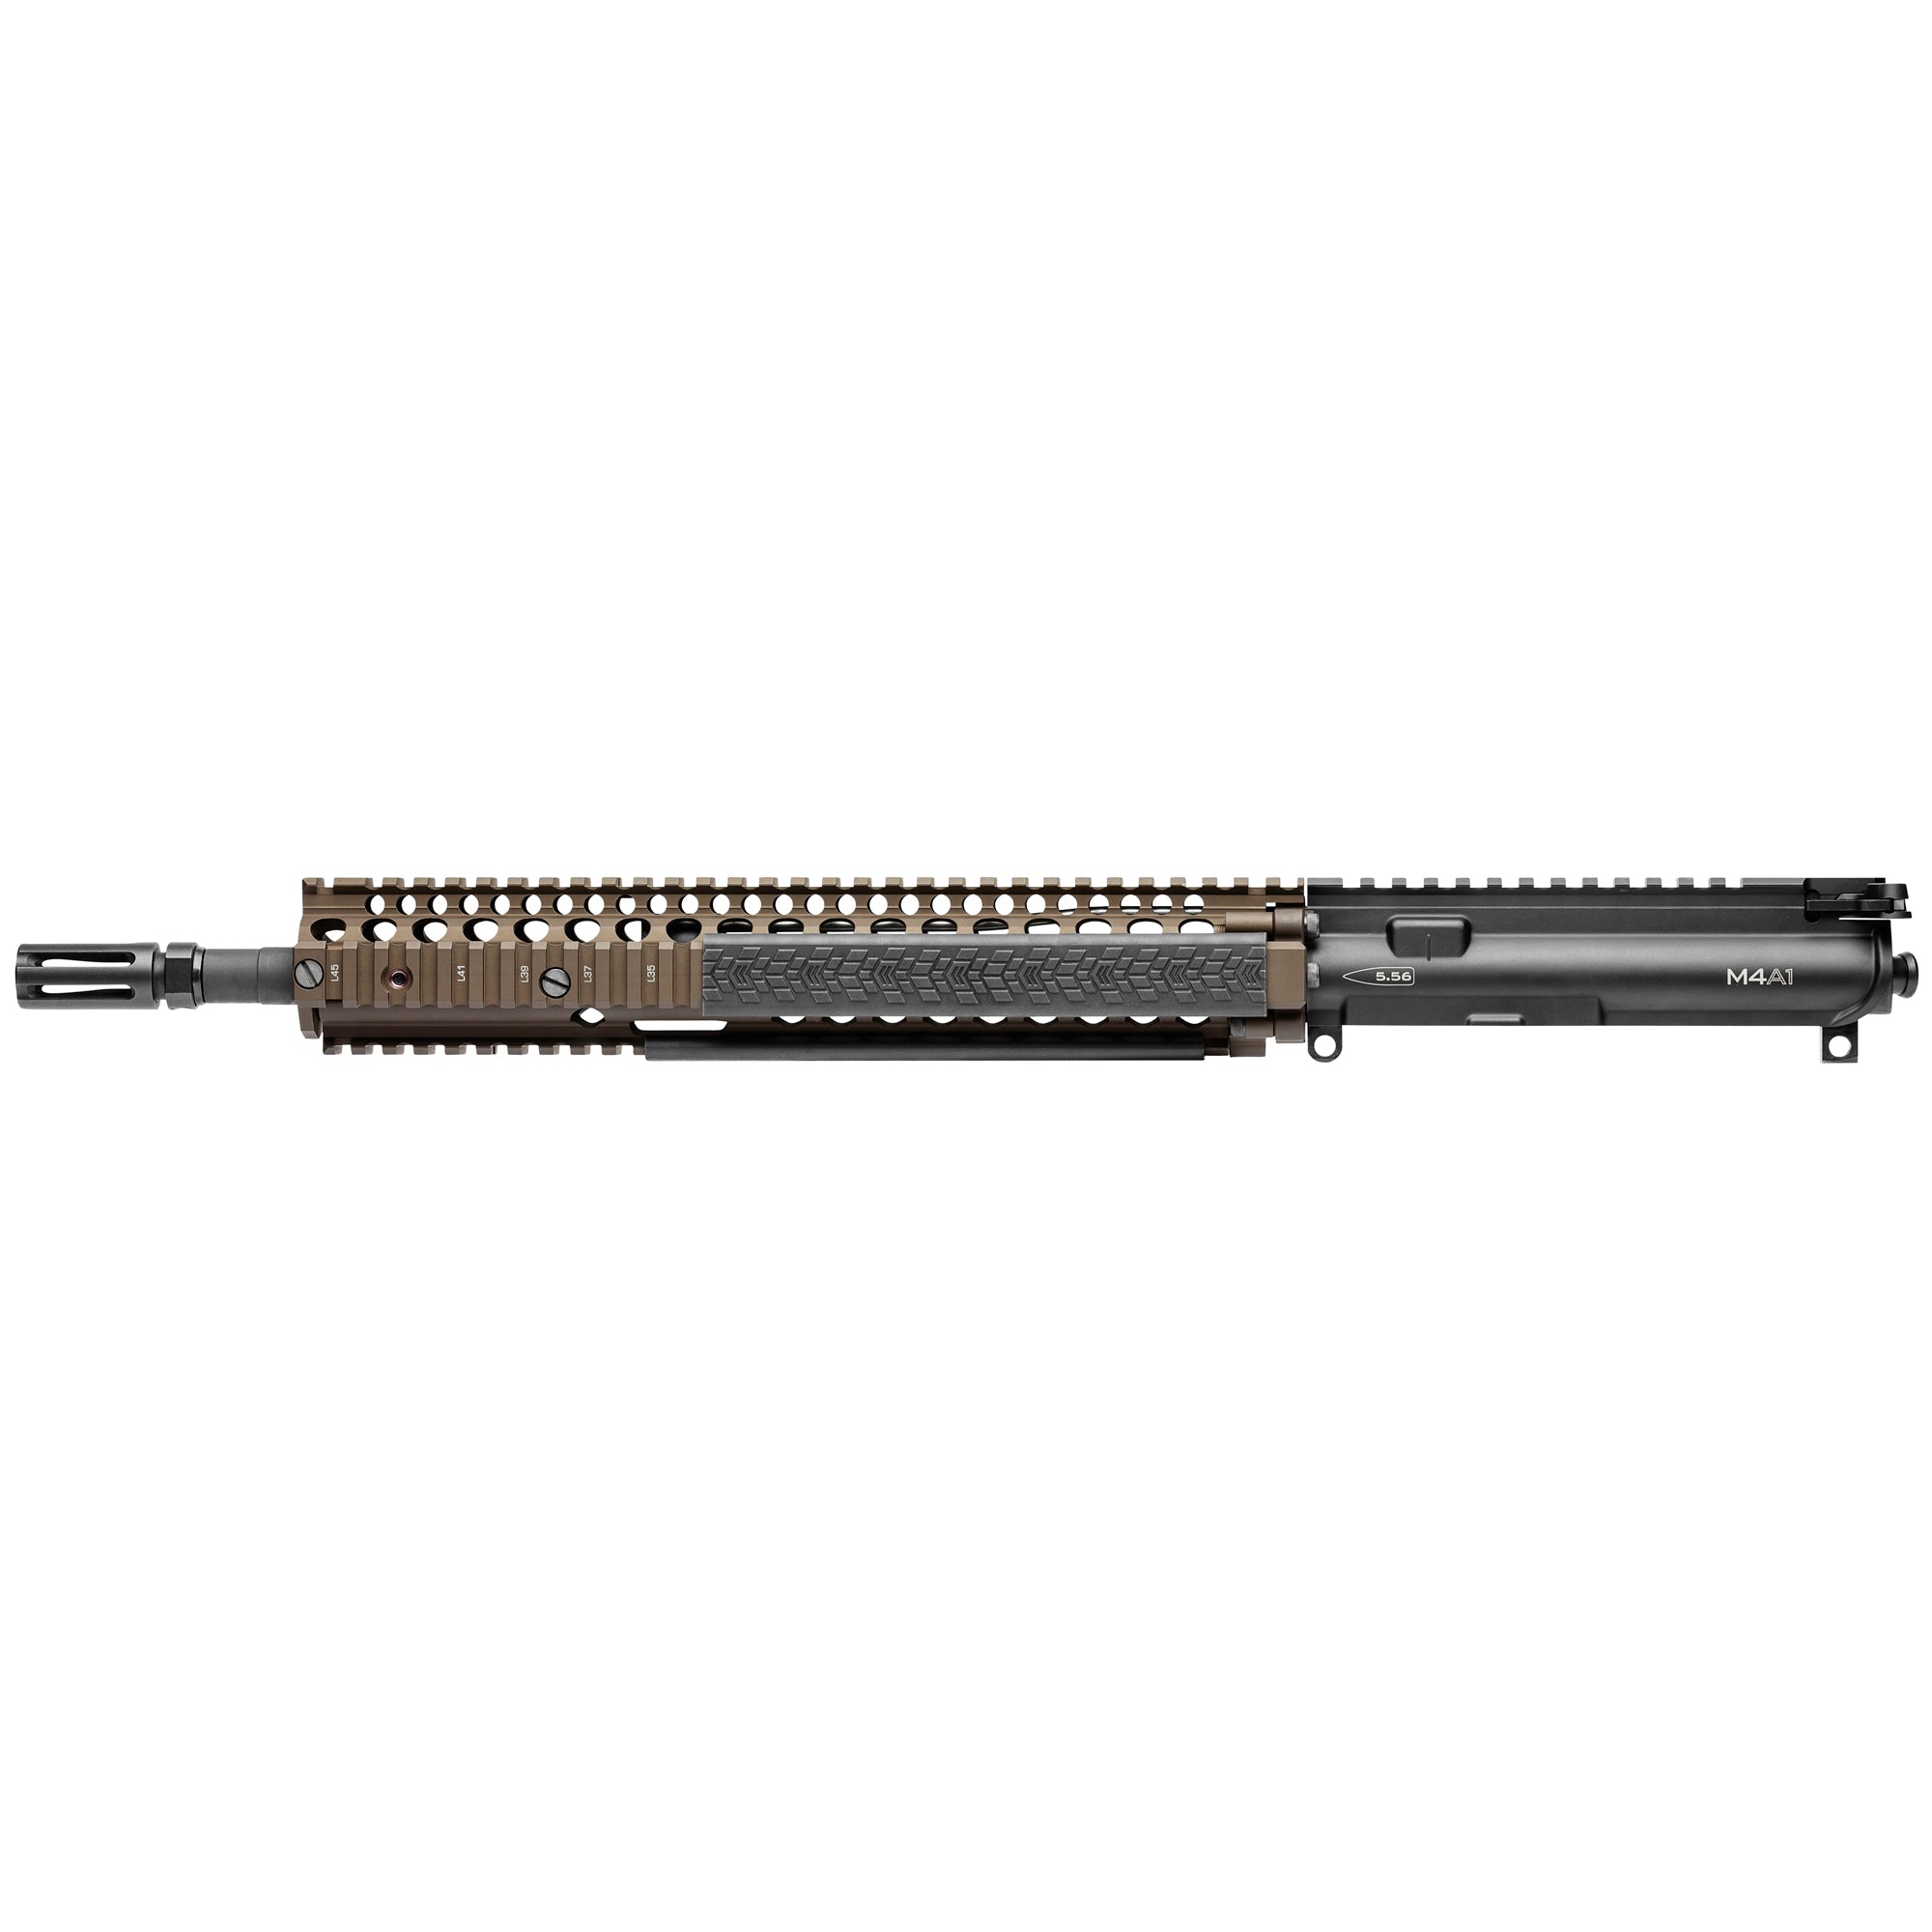 Daniel Defense M4A1 Upper Receiver in Flat Dark Earth with a 14.5-inch barrel and M4 RIS II rail system, showing the carbine length gas system and included bolt carrier group